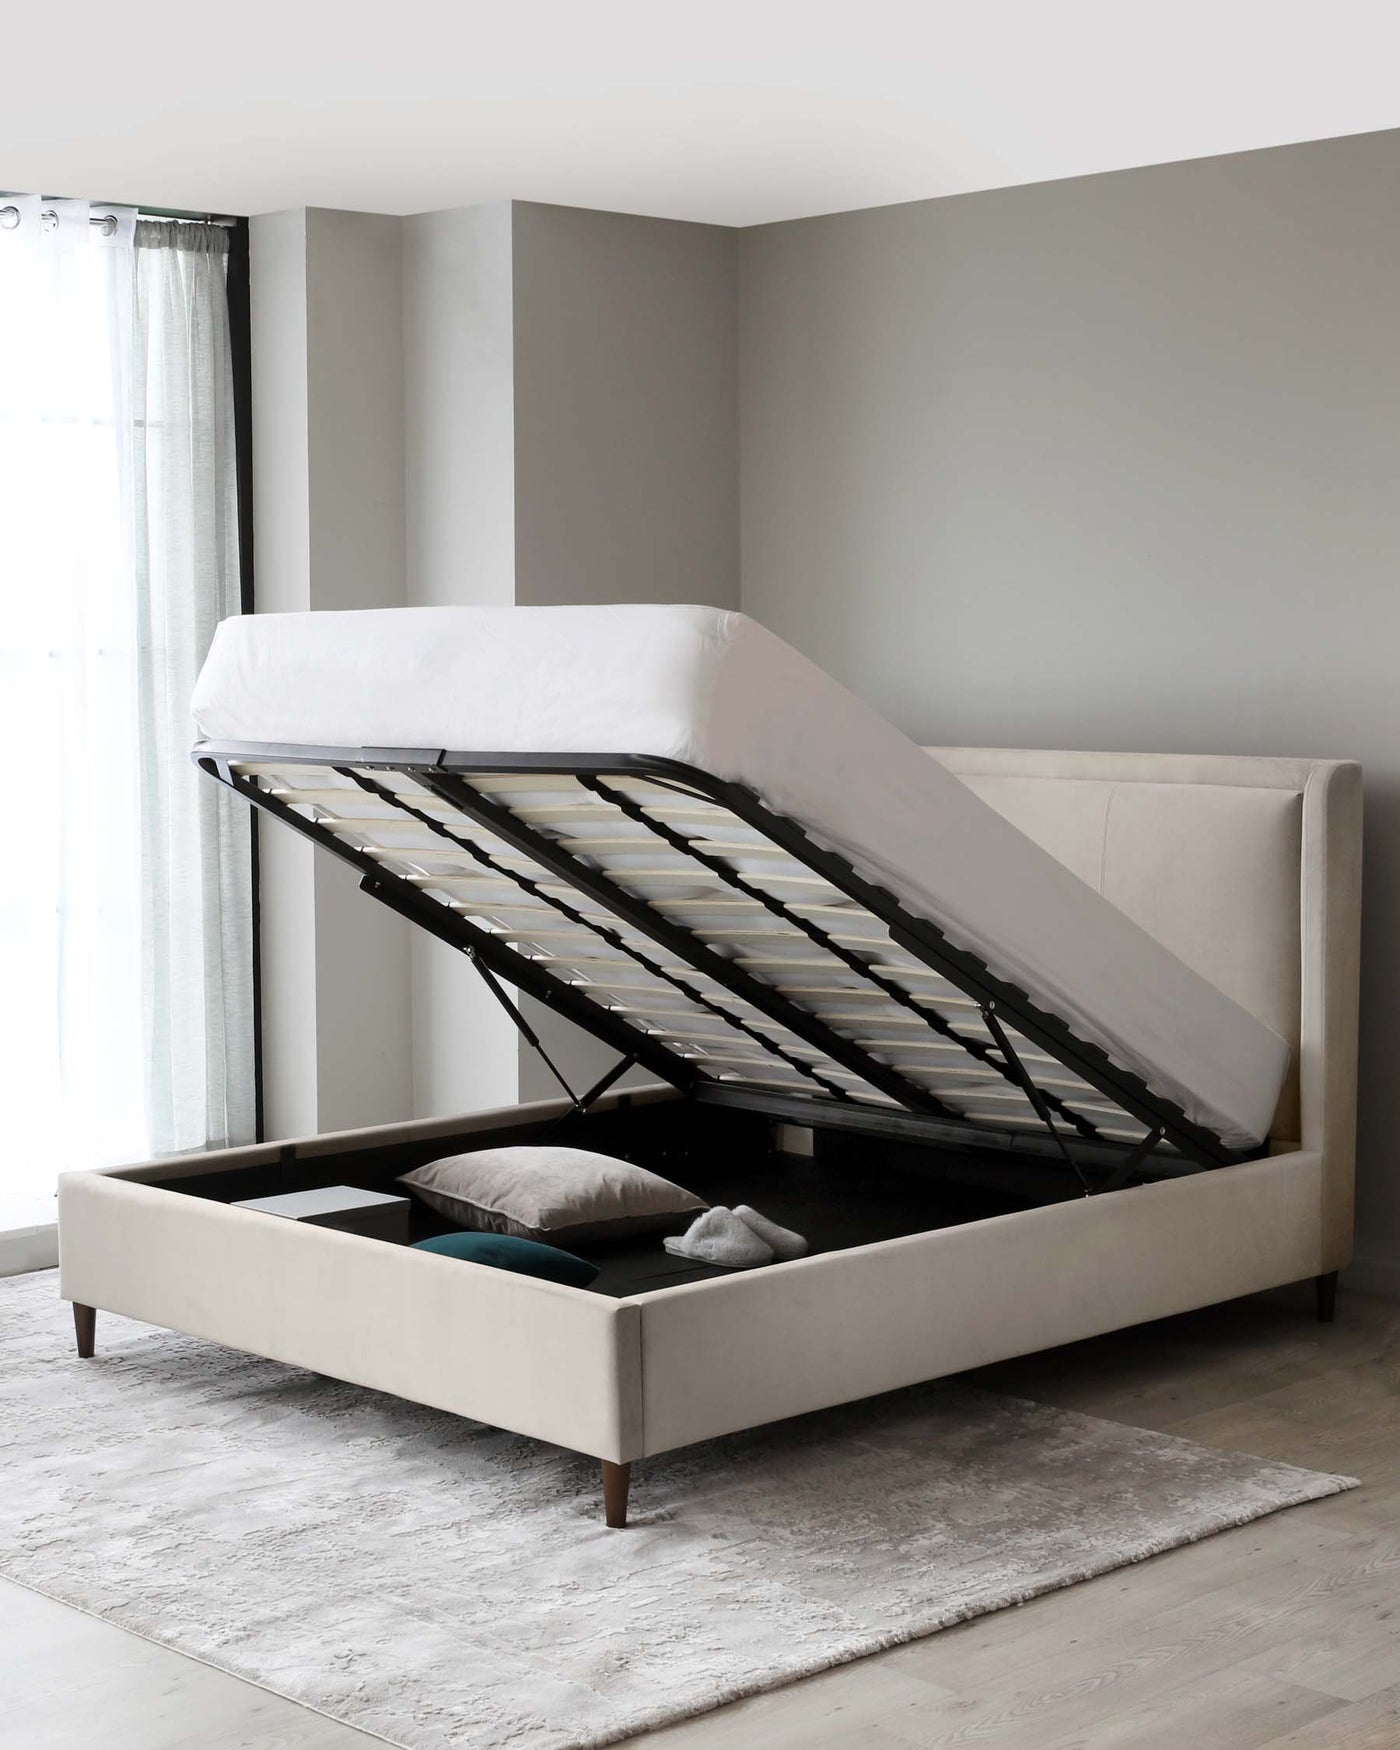 Contemporary beige upholstered storage bed with a lifted mattress revealing an organized compartmentalized space underneath. The bed features a tufted headboard and dark wooden legs, placed on a textured light grey area rug.